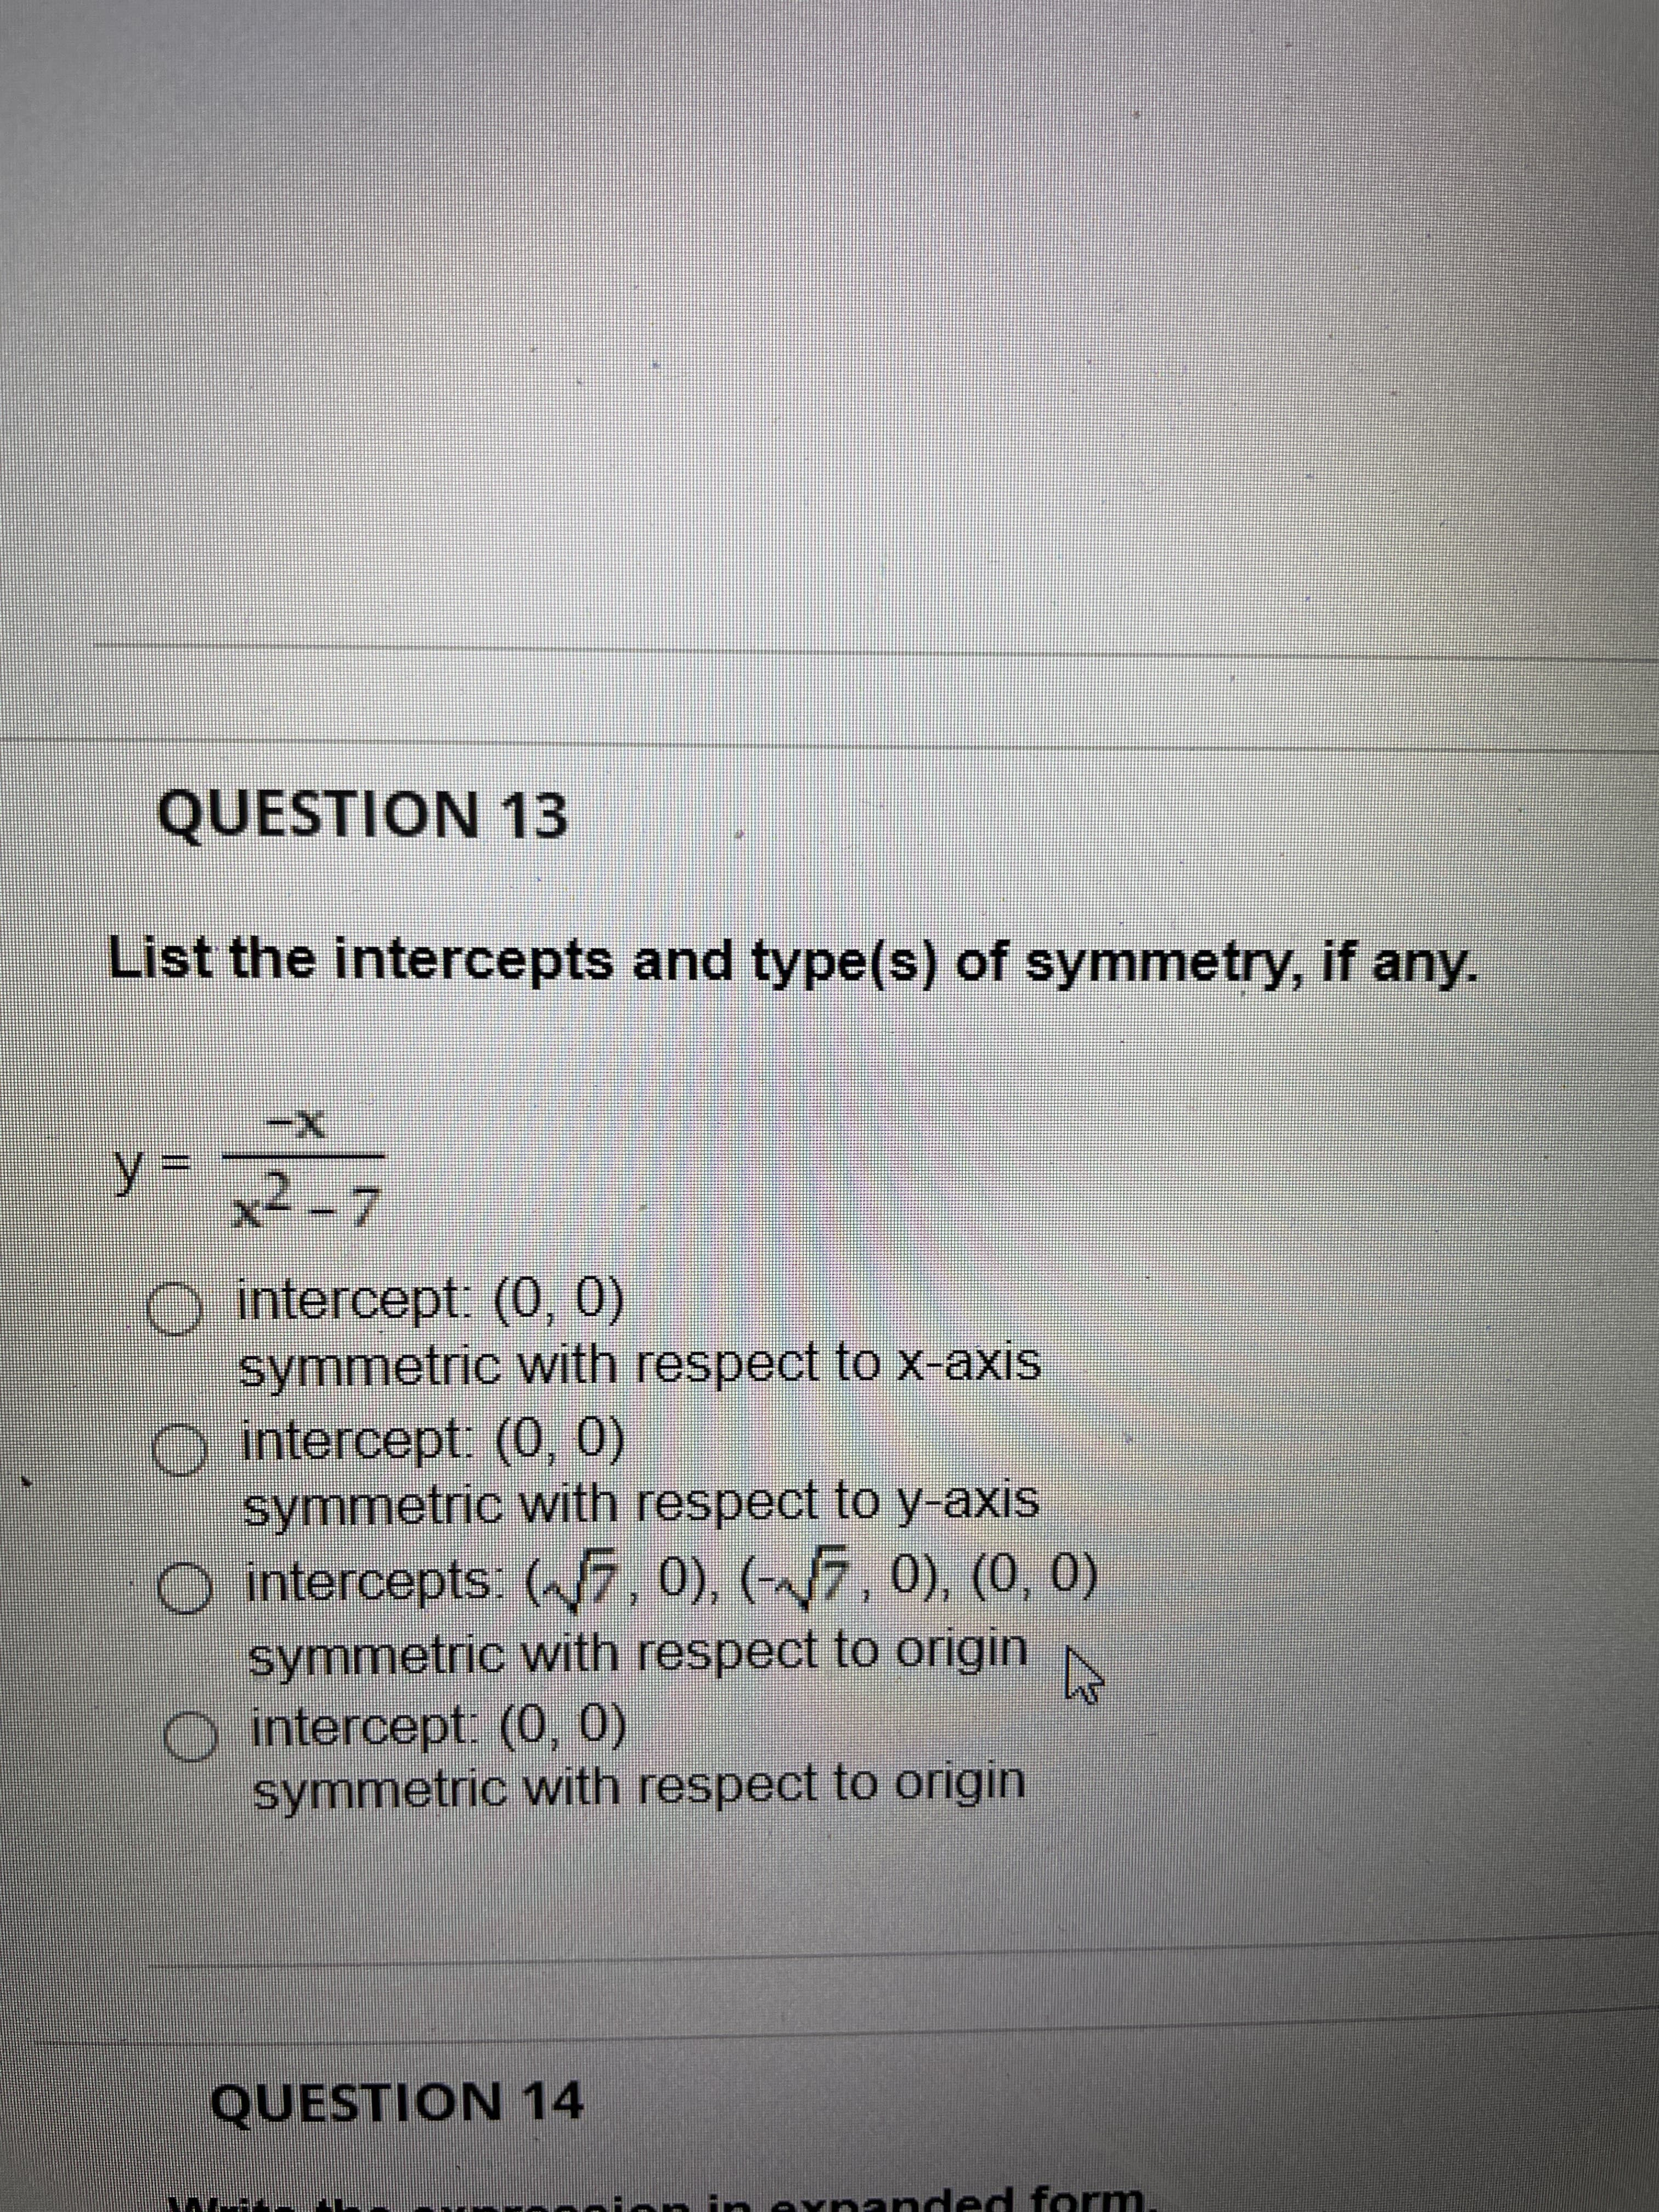 QUESTION 13
List the intercepts and type(s) of symmetry, if any.
-
x2-7
y.
intercept: (0, 0)
symmetric with respect tO x-axis
intercept. (0,0)
symmetric vwith respect to y-axis
O intercepts: (7, 0), (-7, 0), (0, 0)
symmetric with respect to origin
O intercept: (0, 0)
symmetric with respect to origin
QUESTION 14
expanded form
